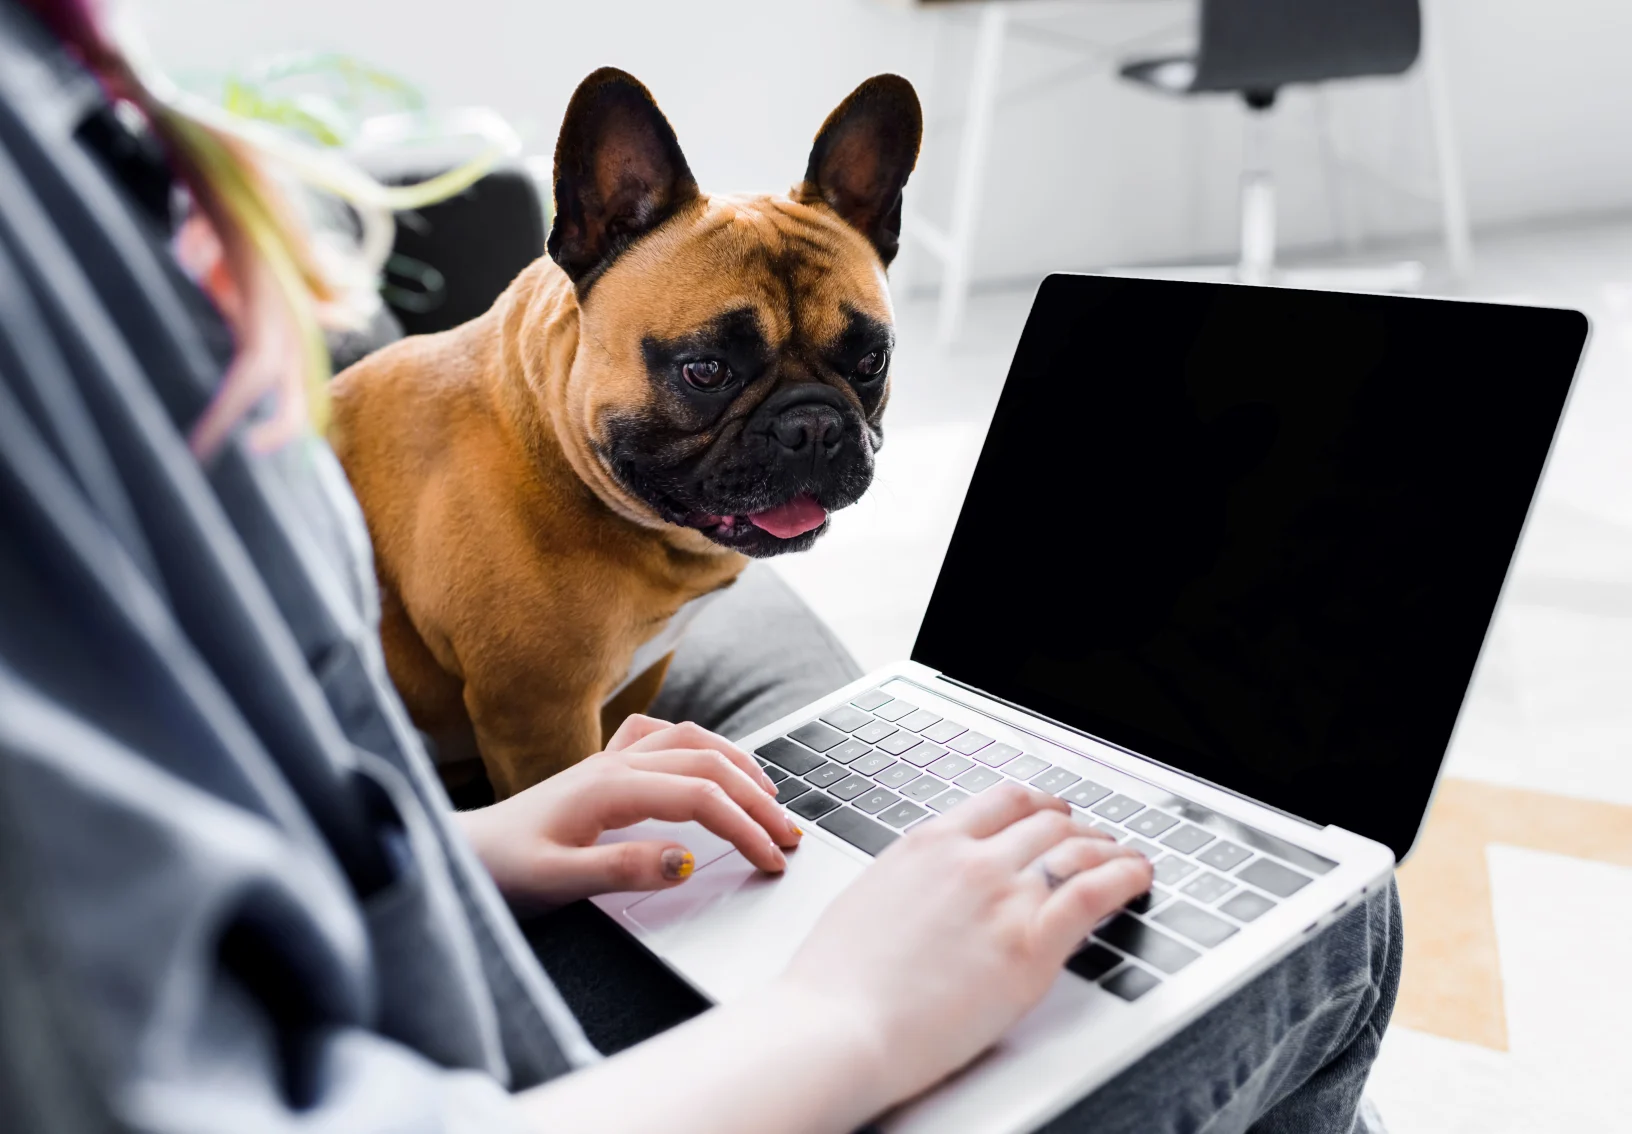 Fawn-colored Frenchie watching women type on laptop